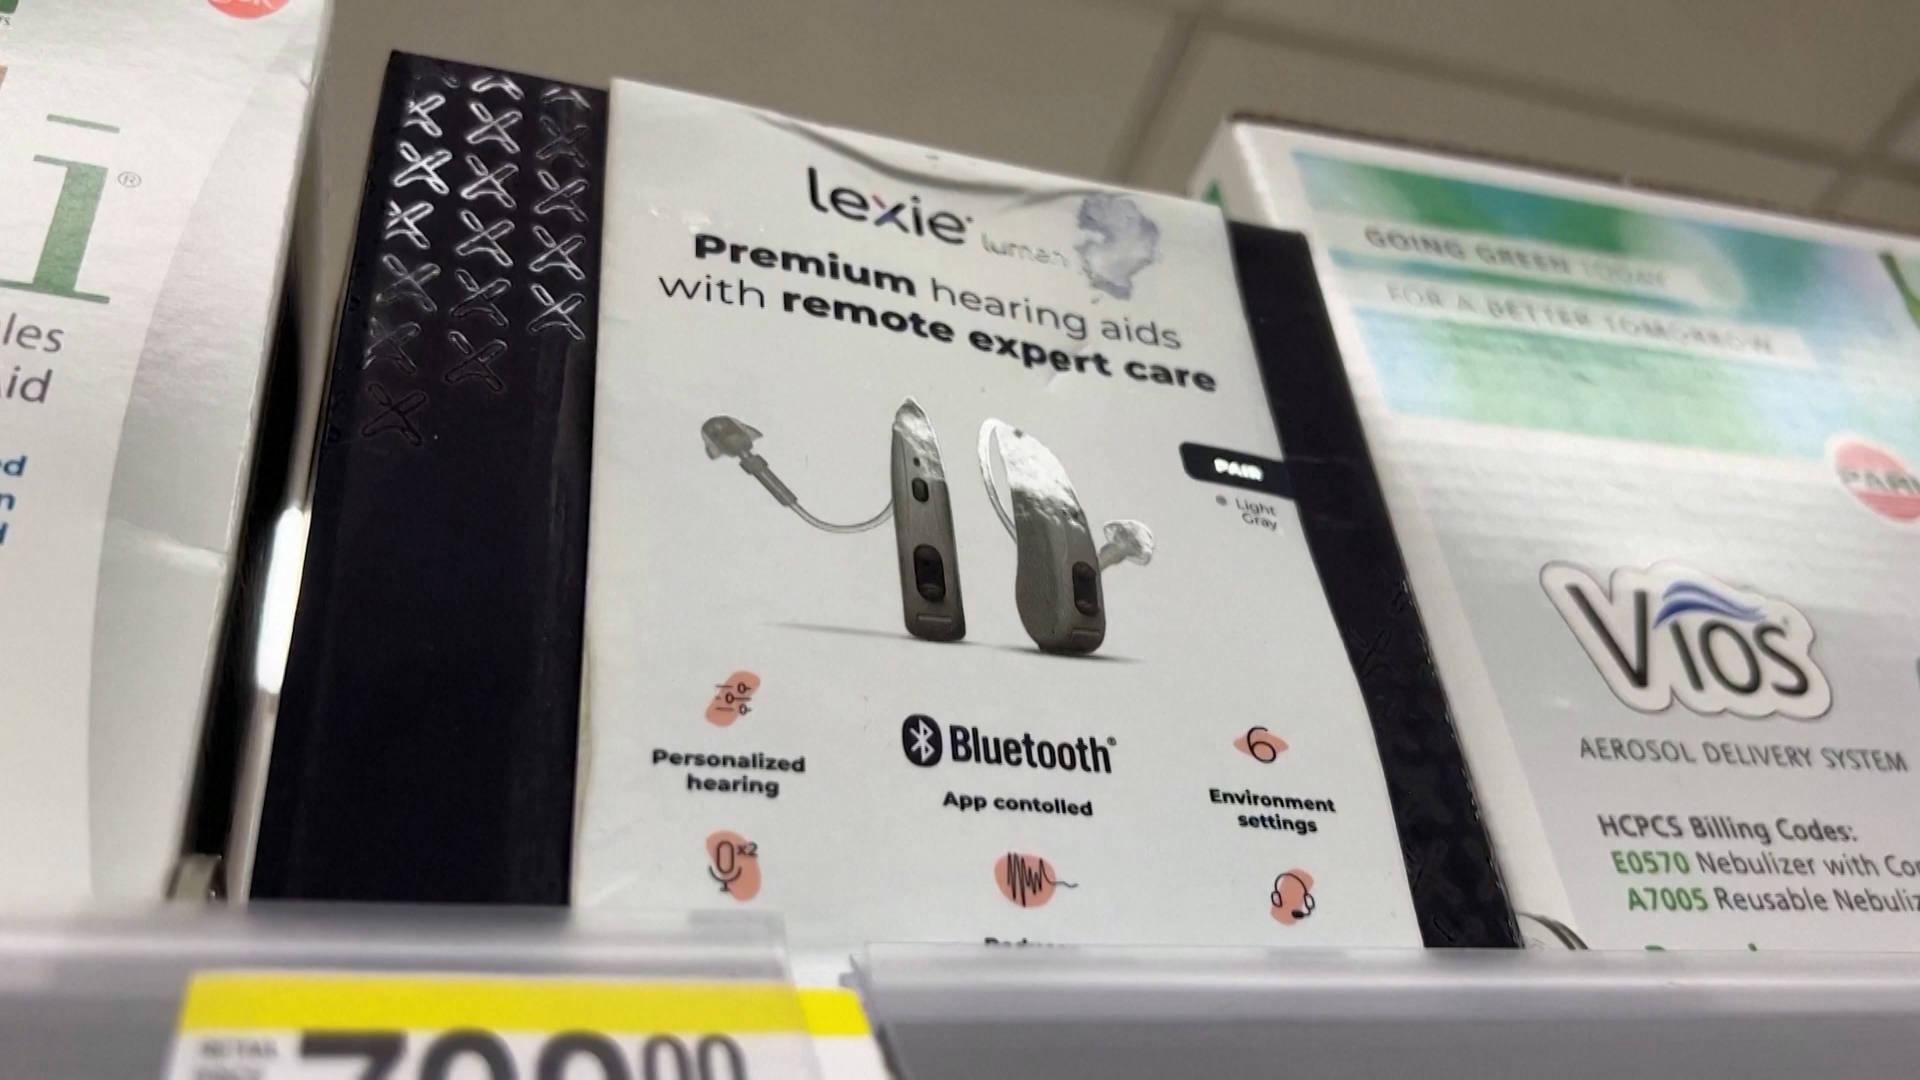 Stores Start Selling Over-the-Counter Hearing Aids